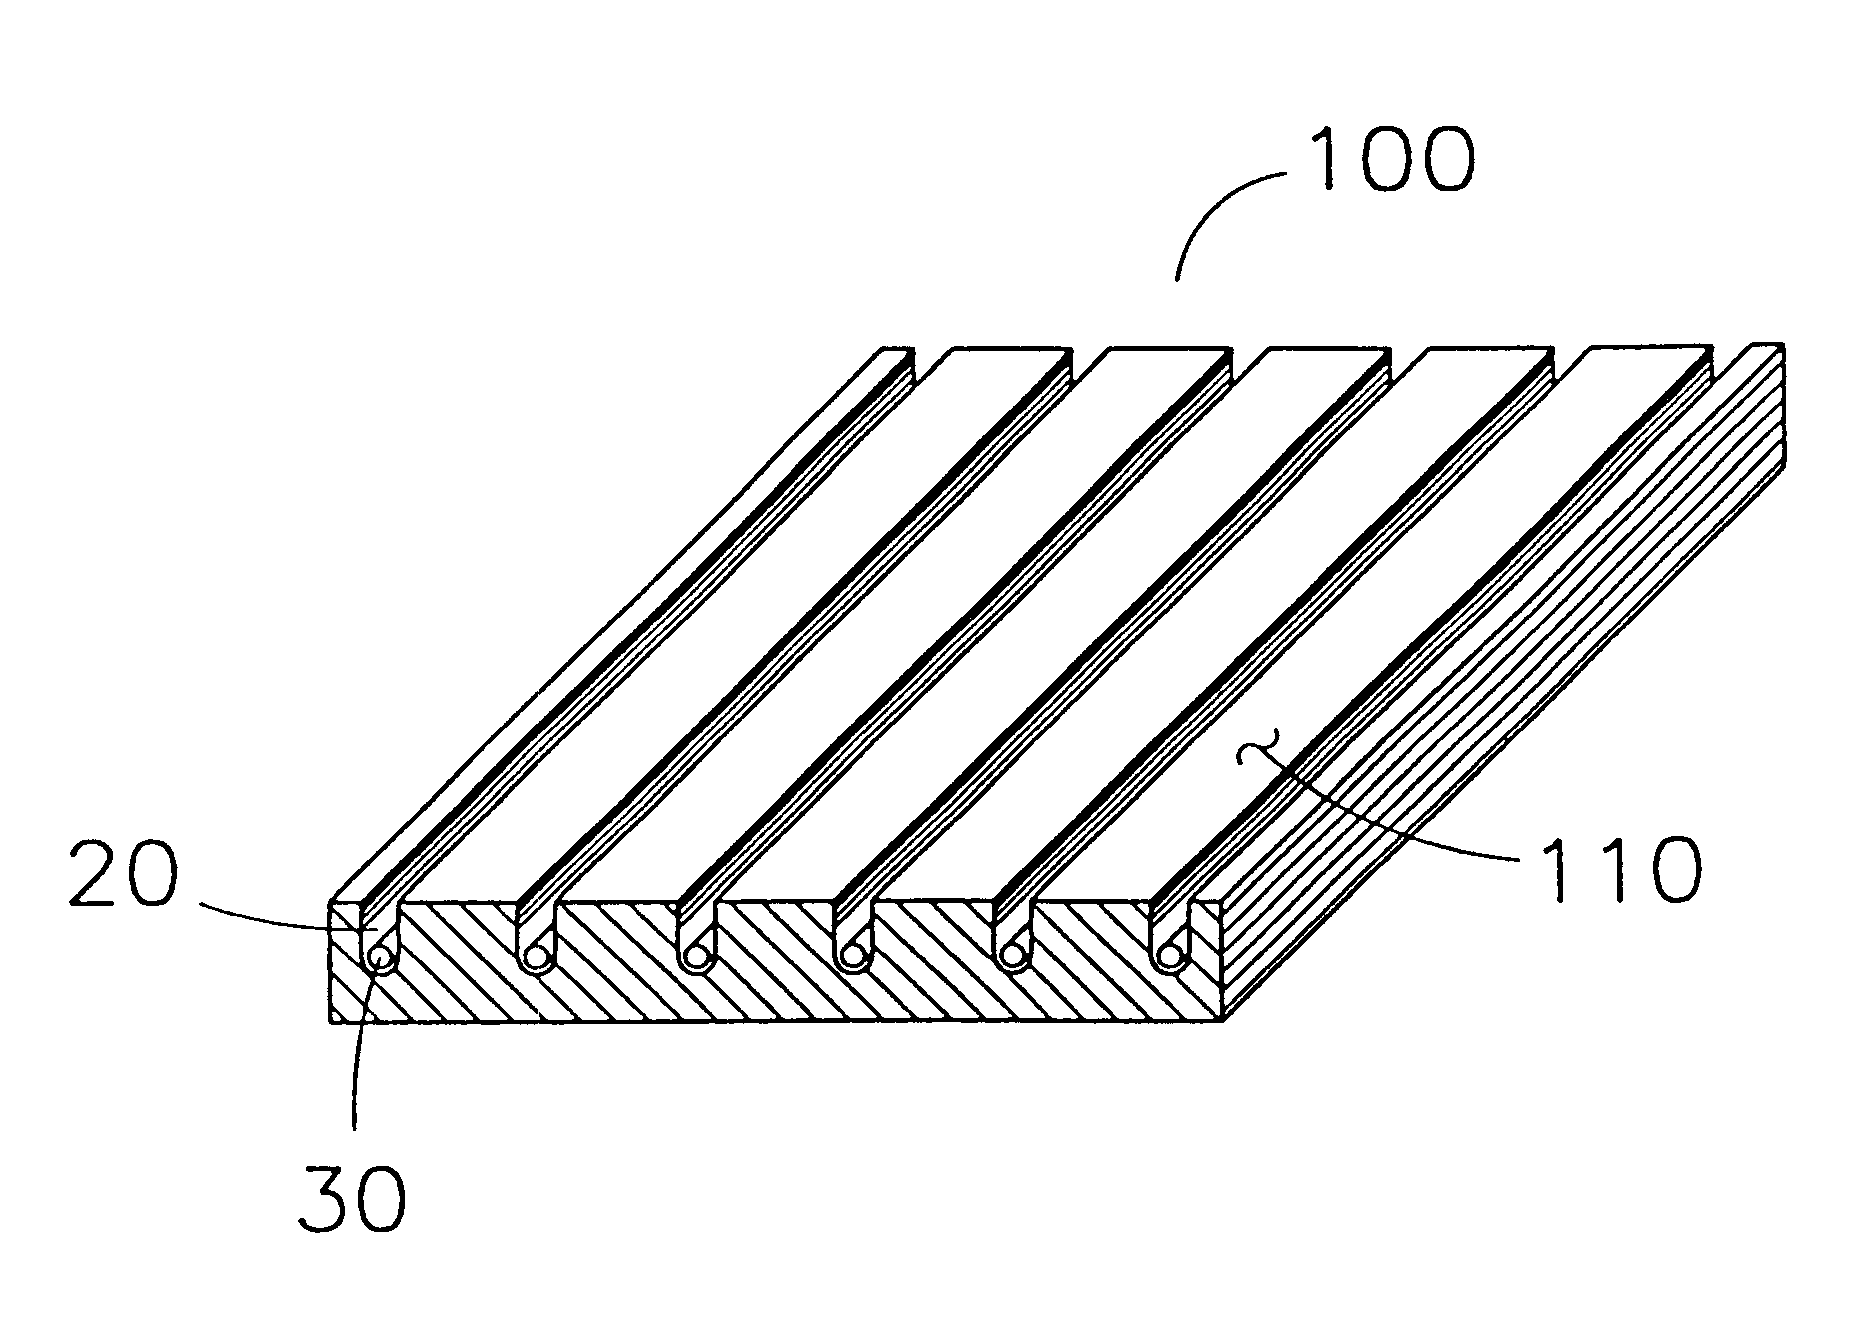 Electrode system in iontophoretic treatment devices